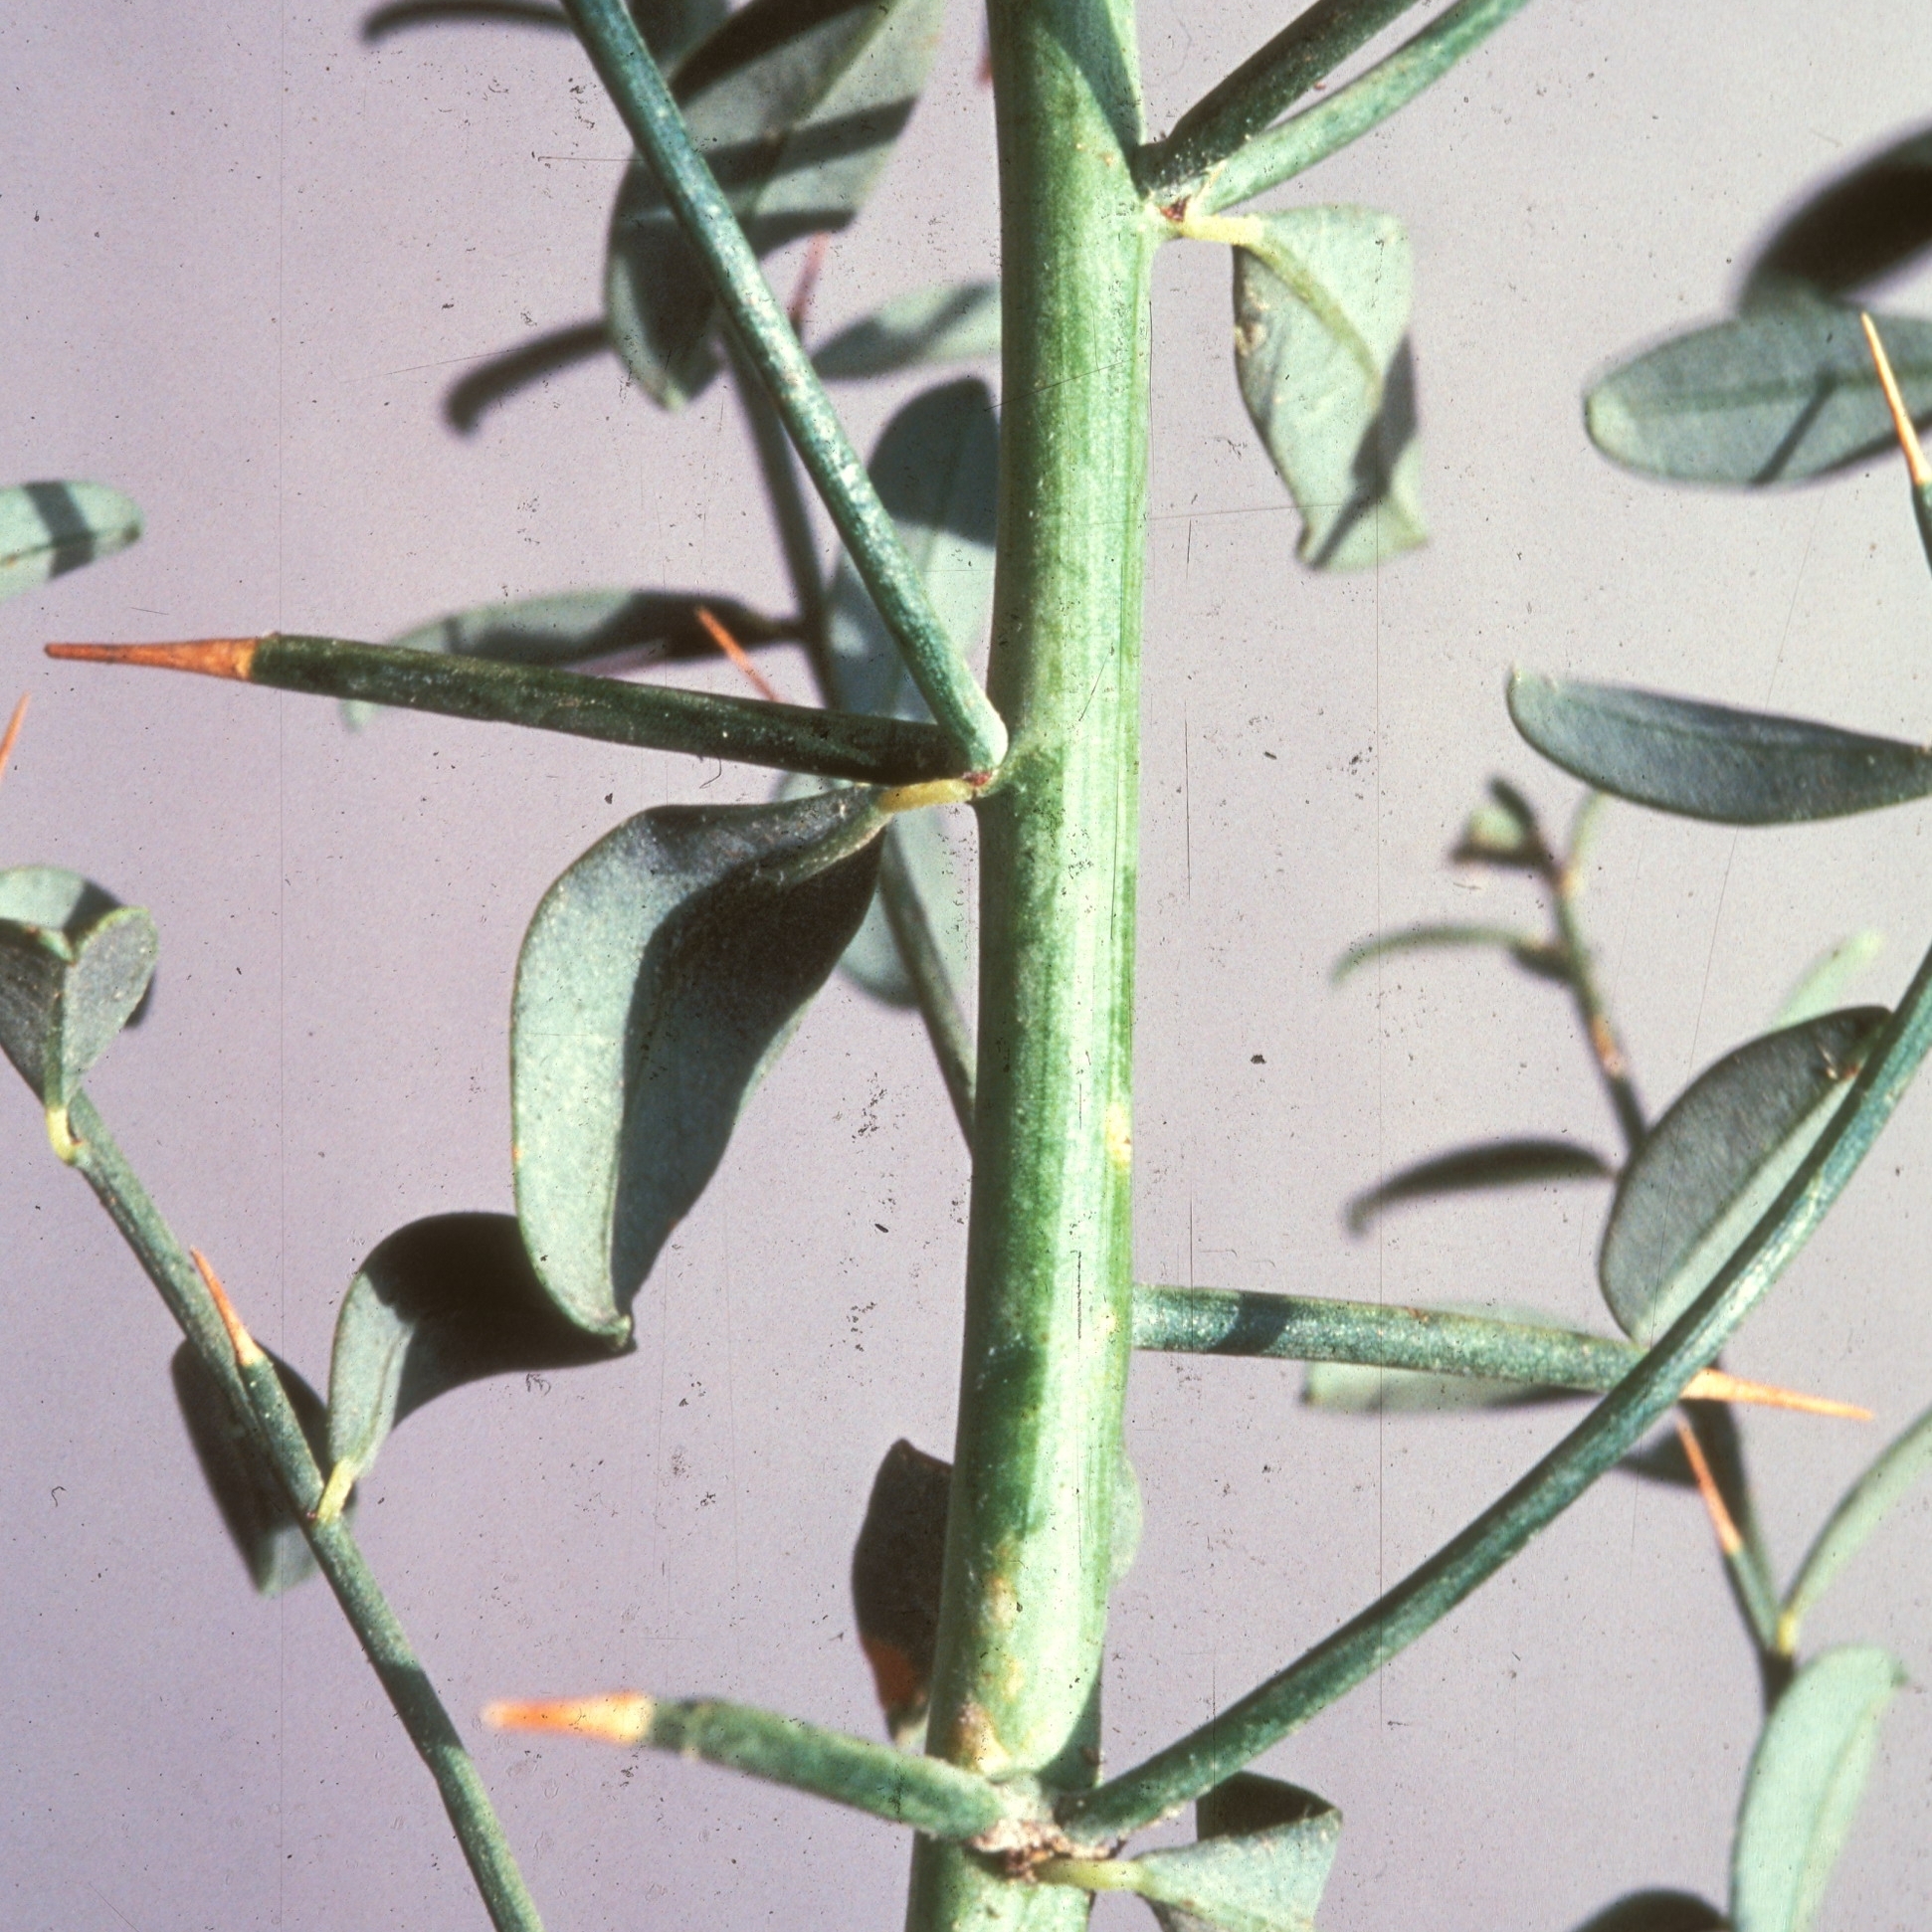 Camelthorn leaves and thorns